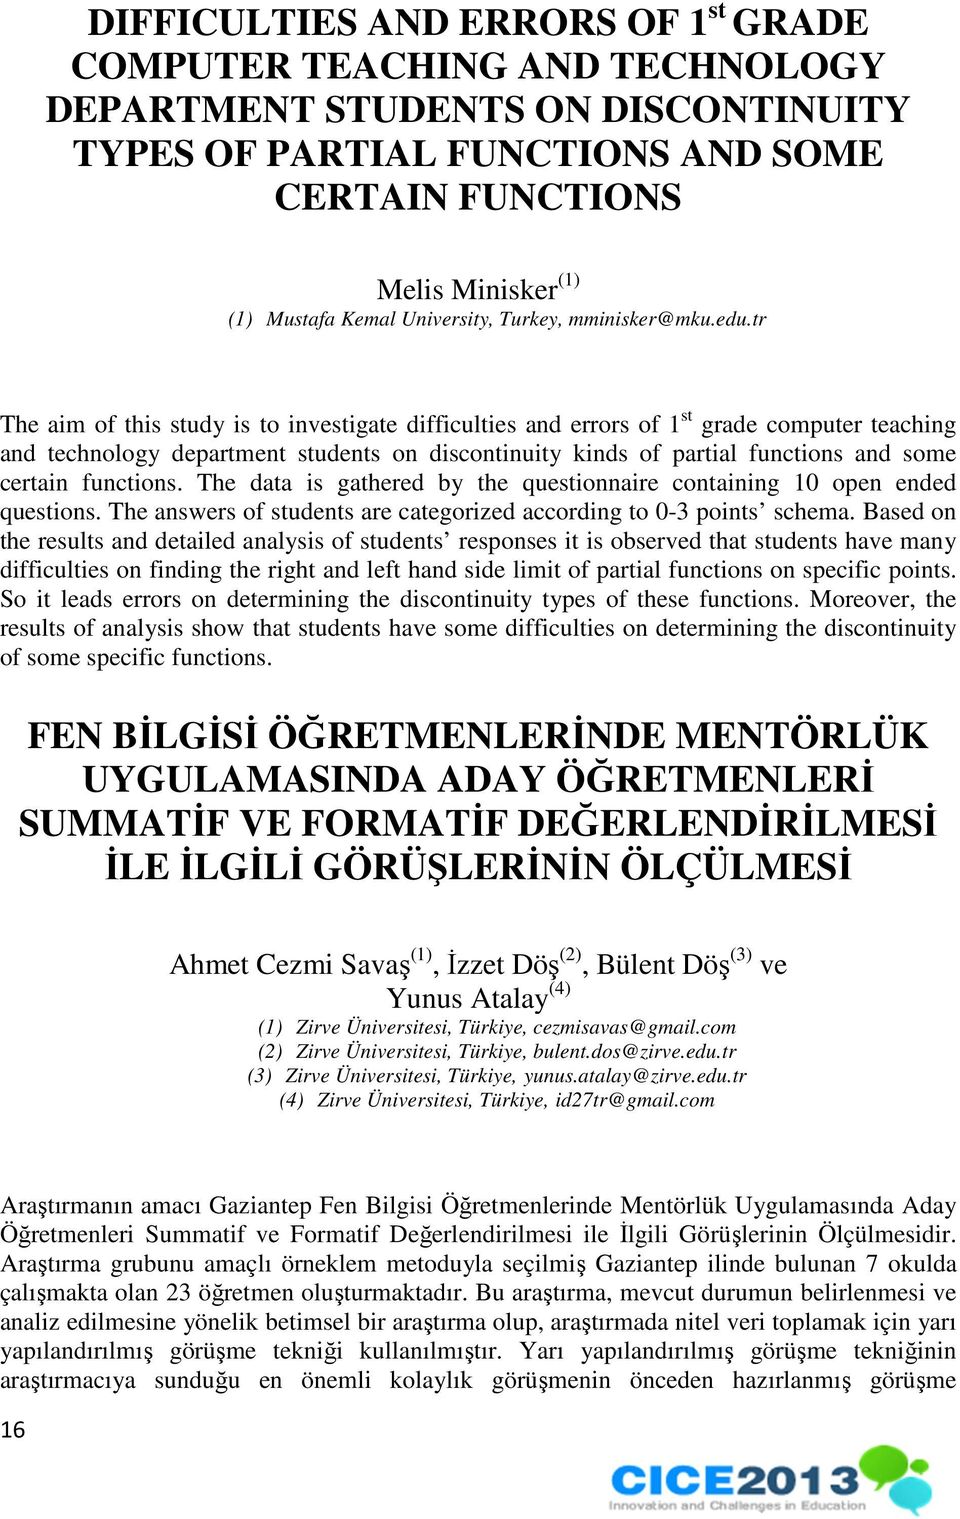 tr The aim of this study is to investigate difficulties and errors of 1 st grade computer teaching and technology department students on discontinuity kinds of partial functions and some certain